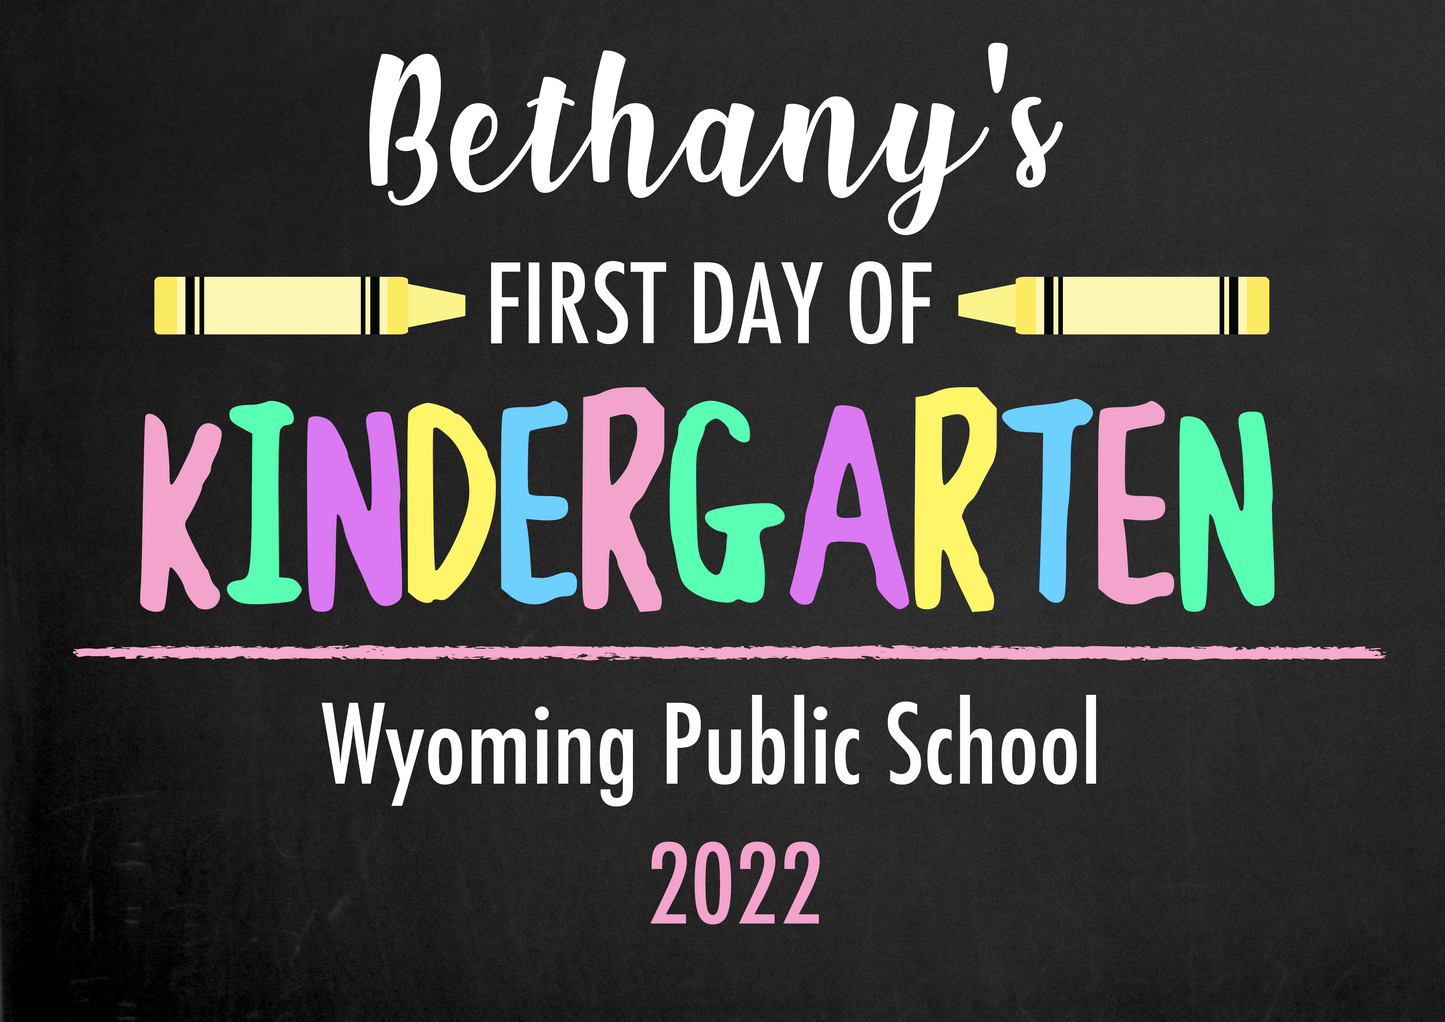 First Day of School sign - PASTEL THEME